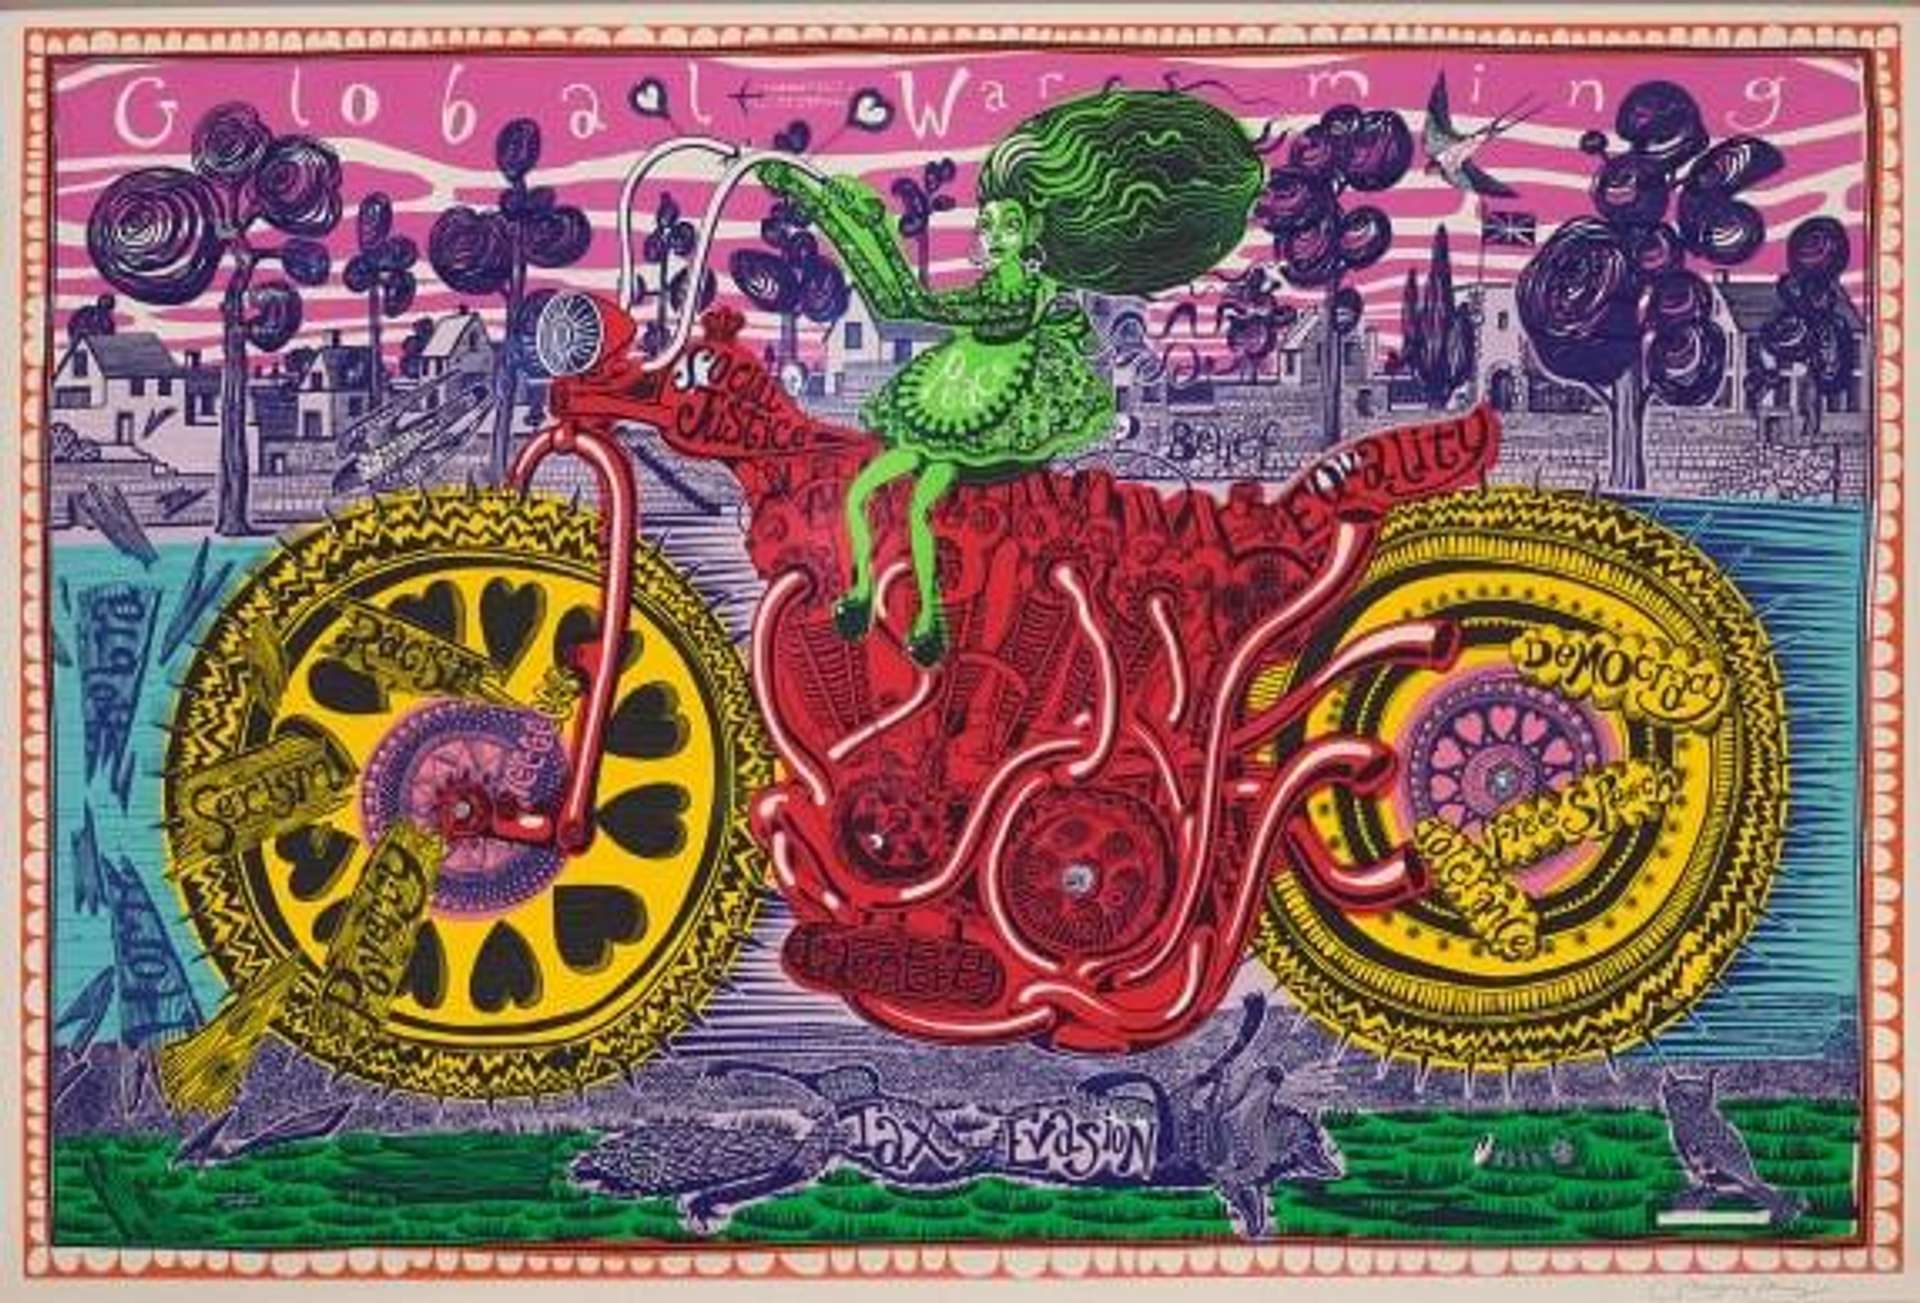 The etching is dominated by the representation of a green, Amazon-like figure intent on riding a bright red and yellow carriage, while surrounded by a phantasmagoric purple and pink background.